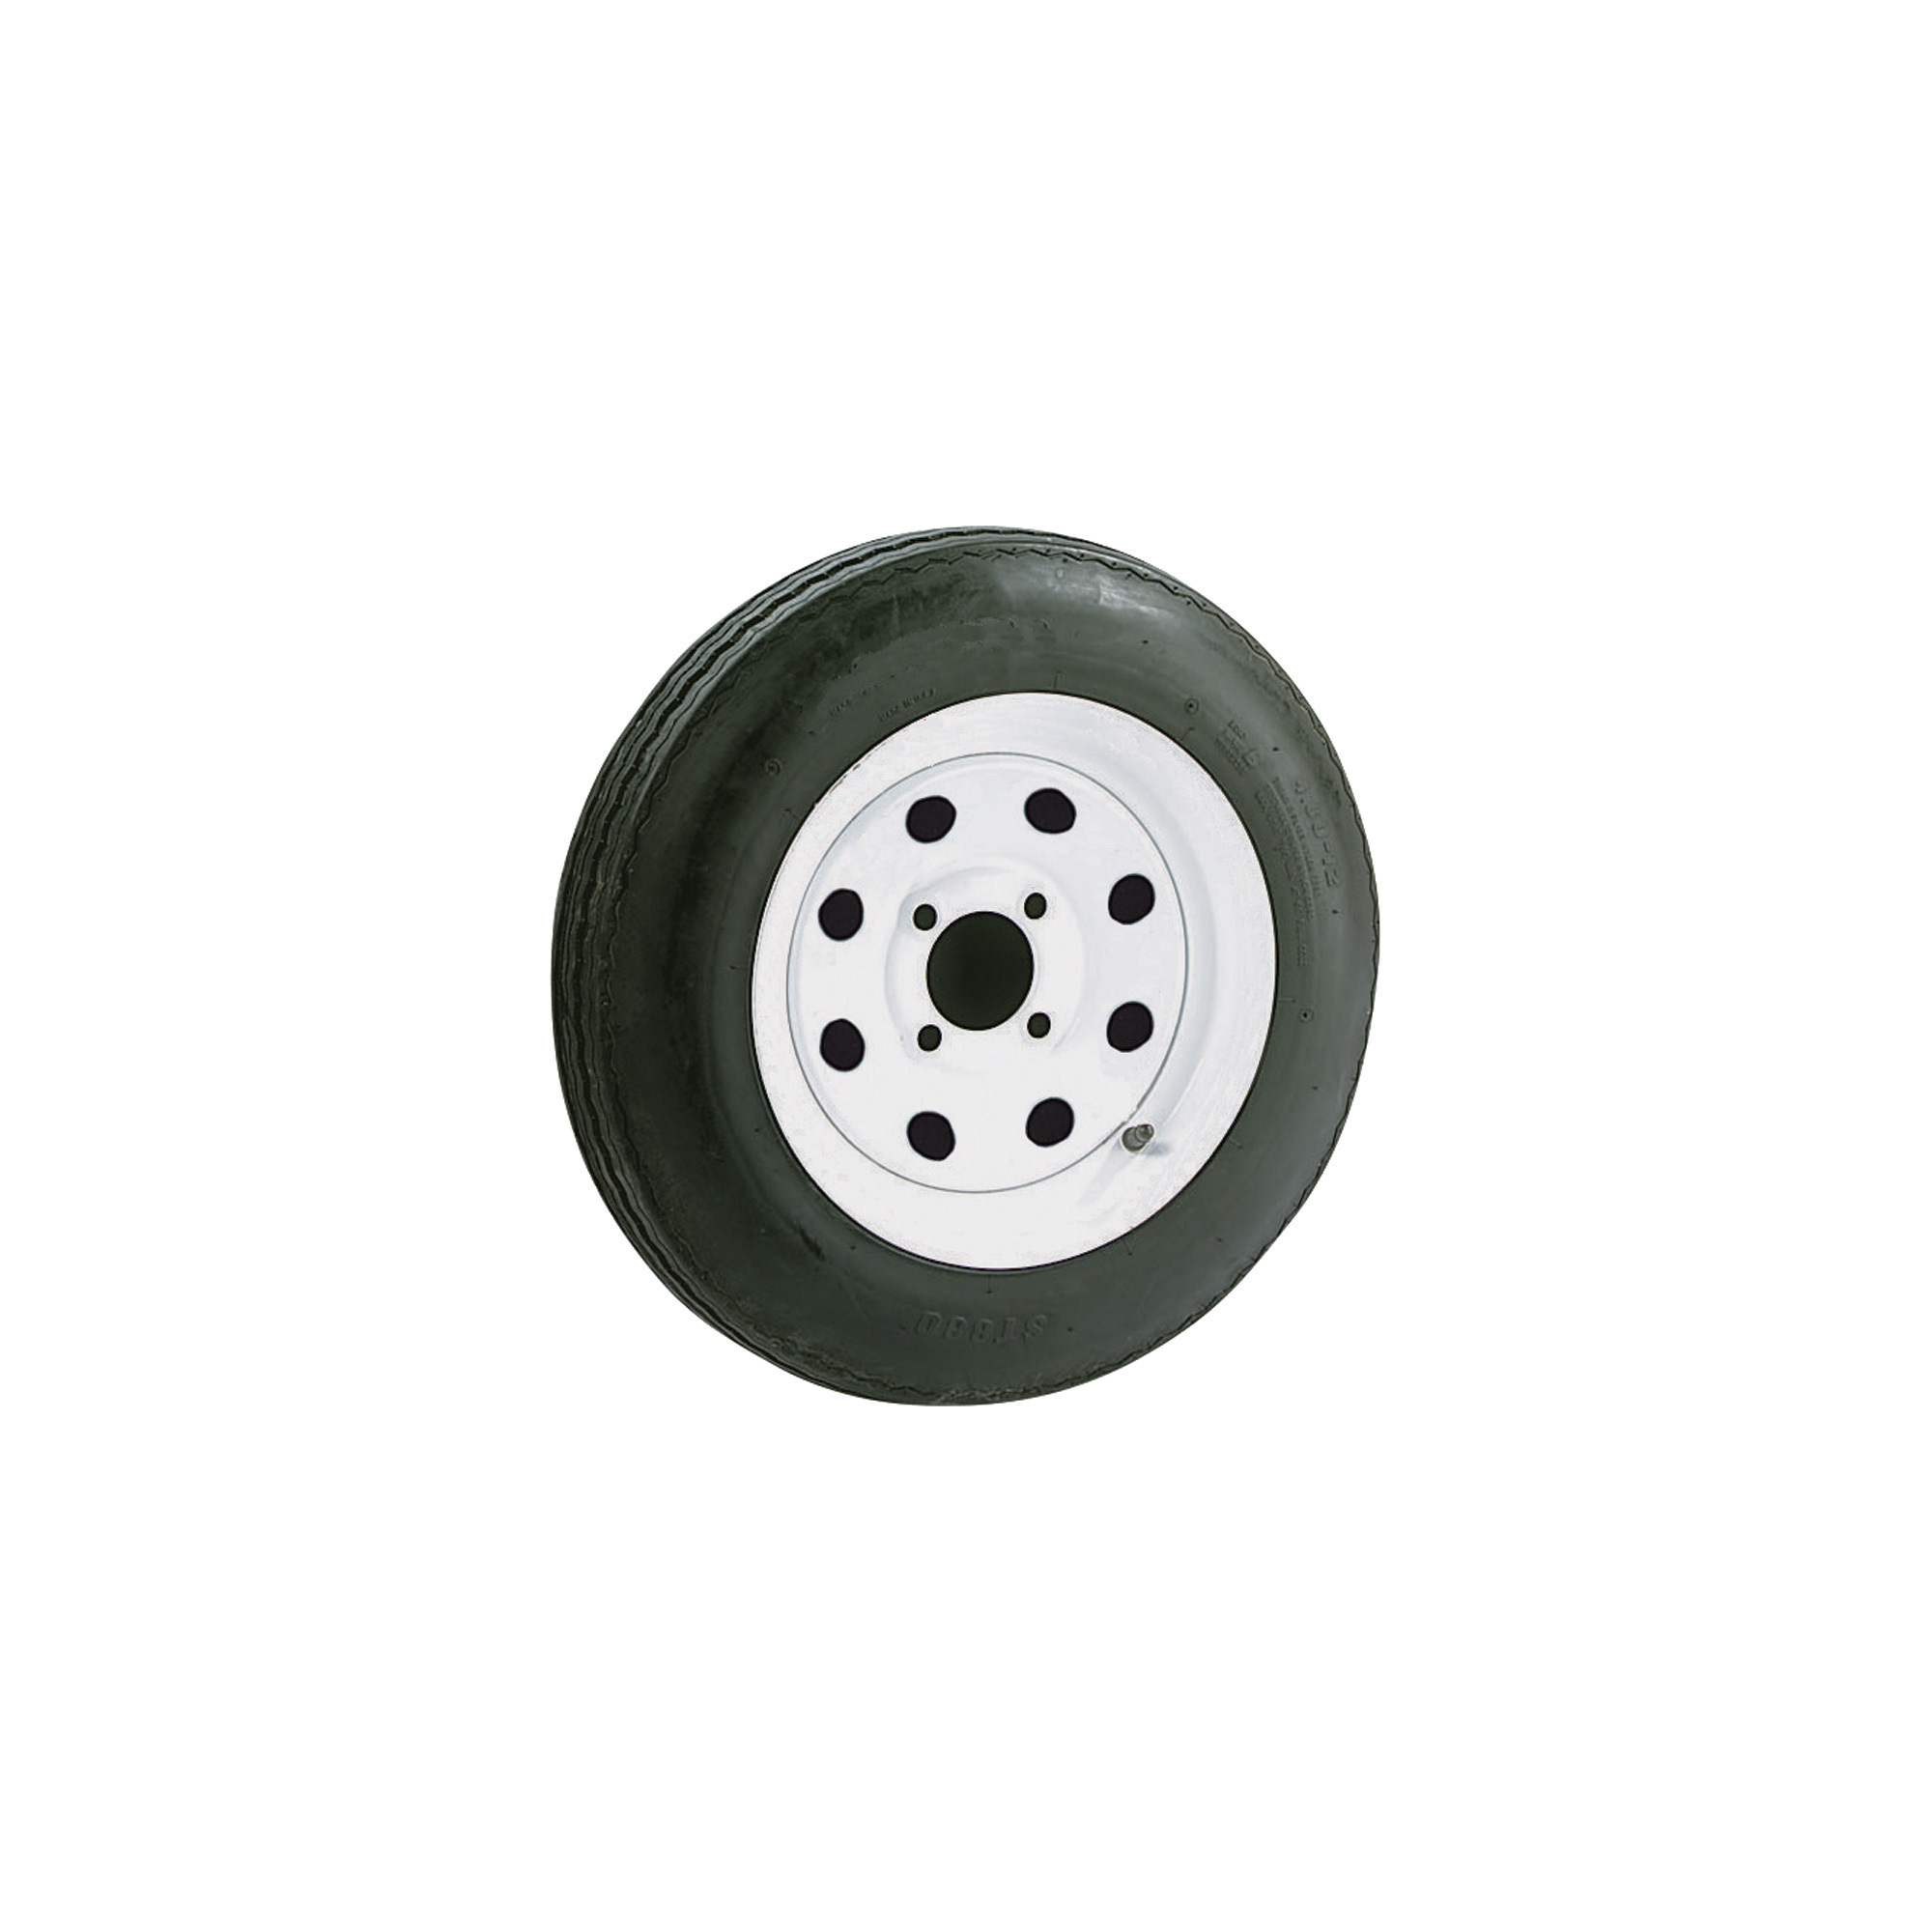 Martin Wheel Carrier Star 13Inch Bias-Ply Trailer Tire and Wheel Assembly â ST175/80D-13, 4-Hole, Load Range C, Model DM175D3C-4MMN